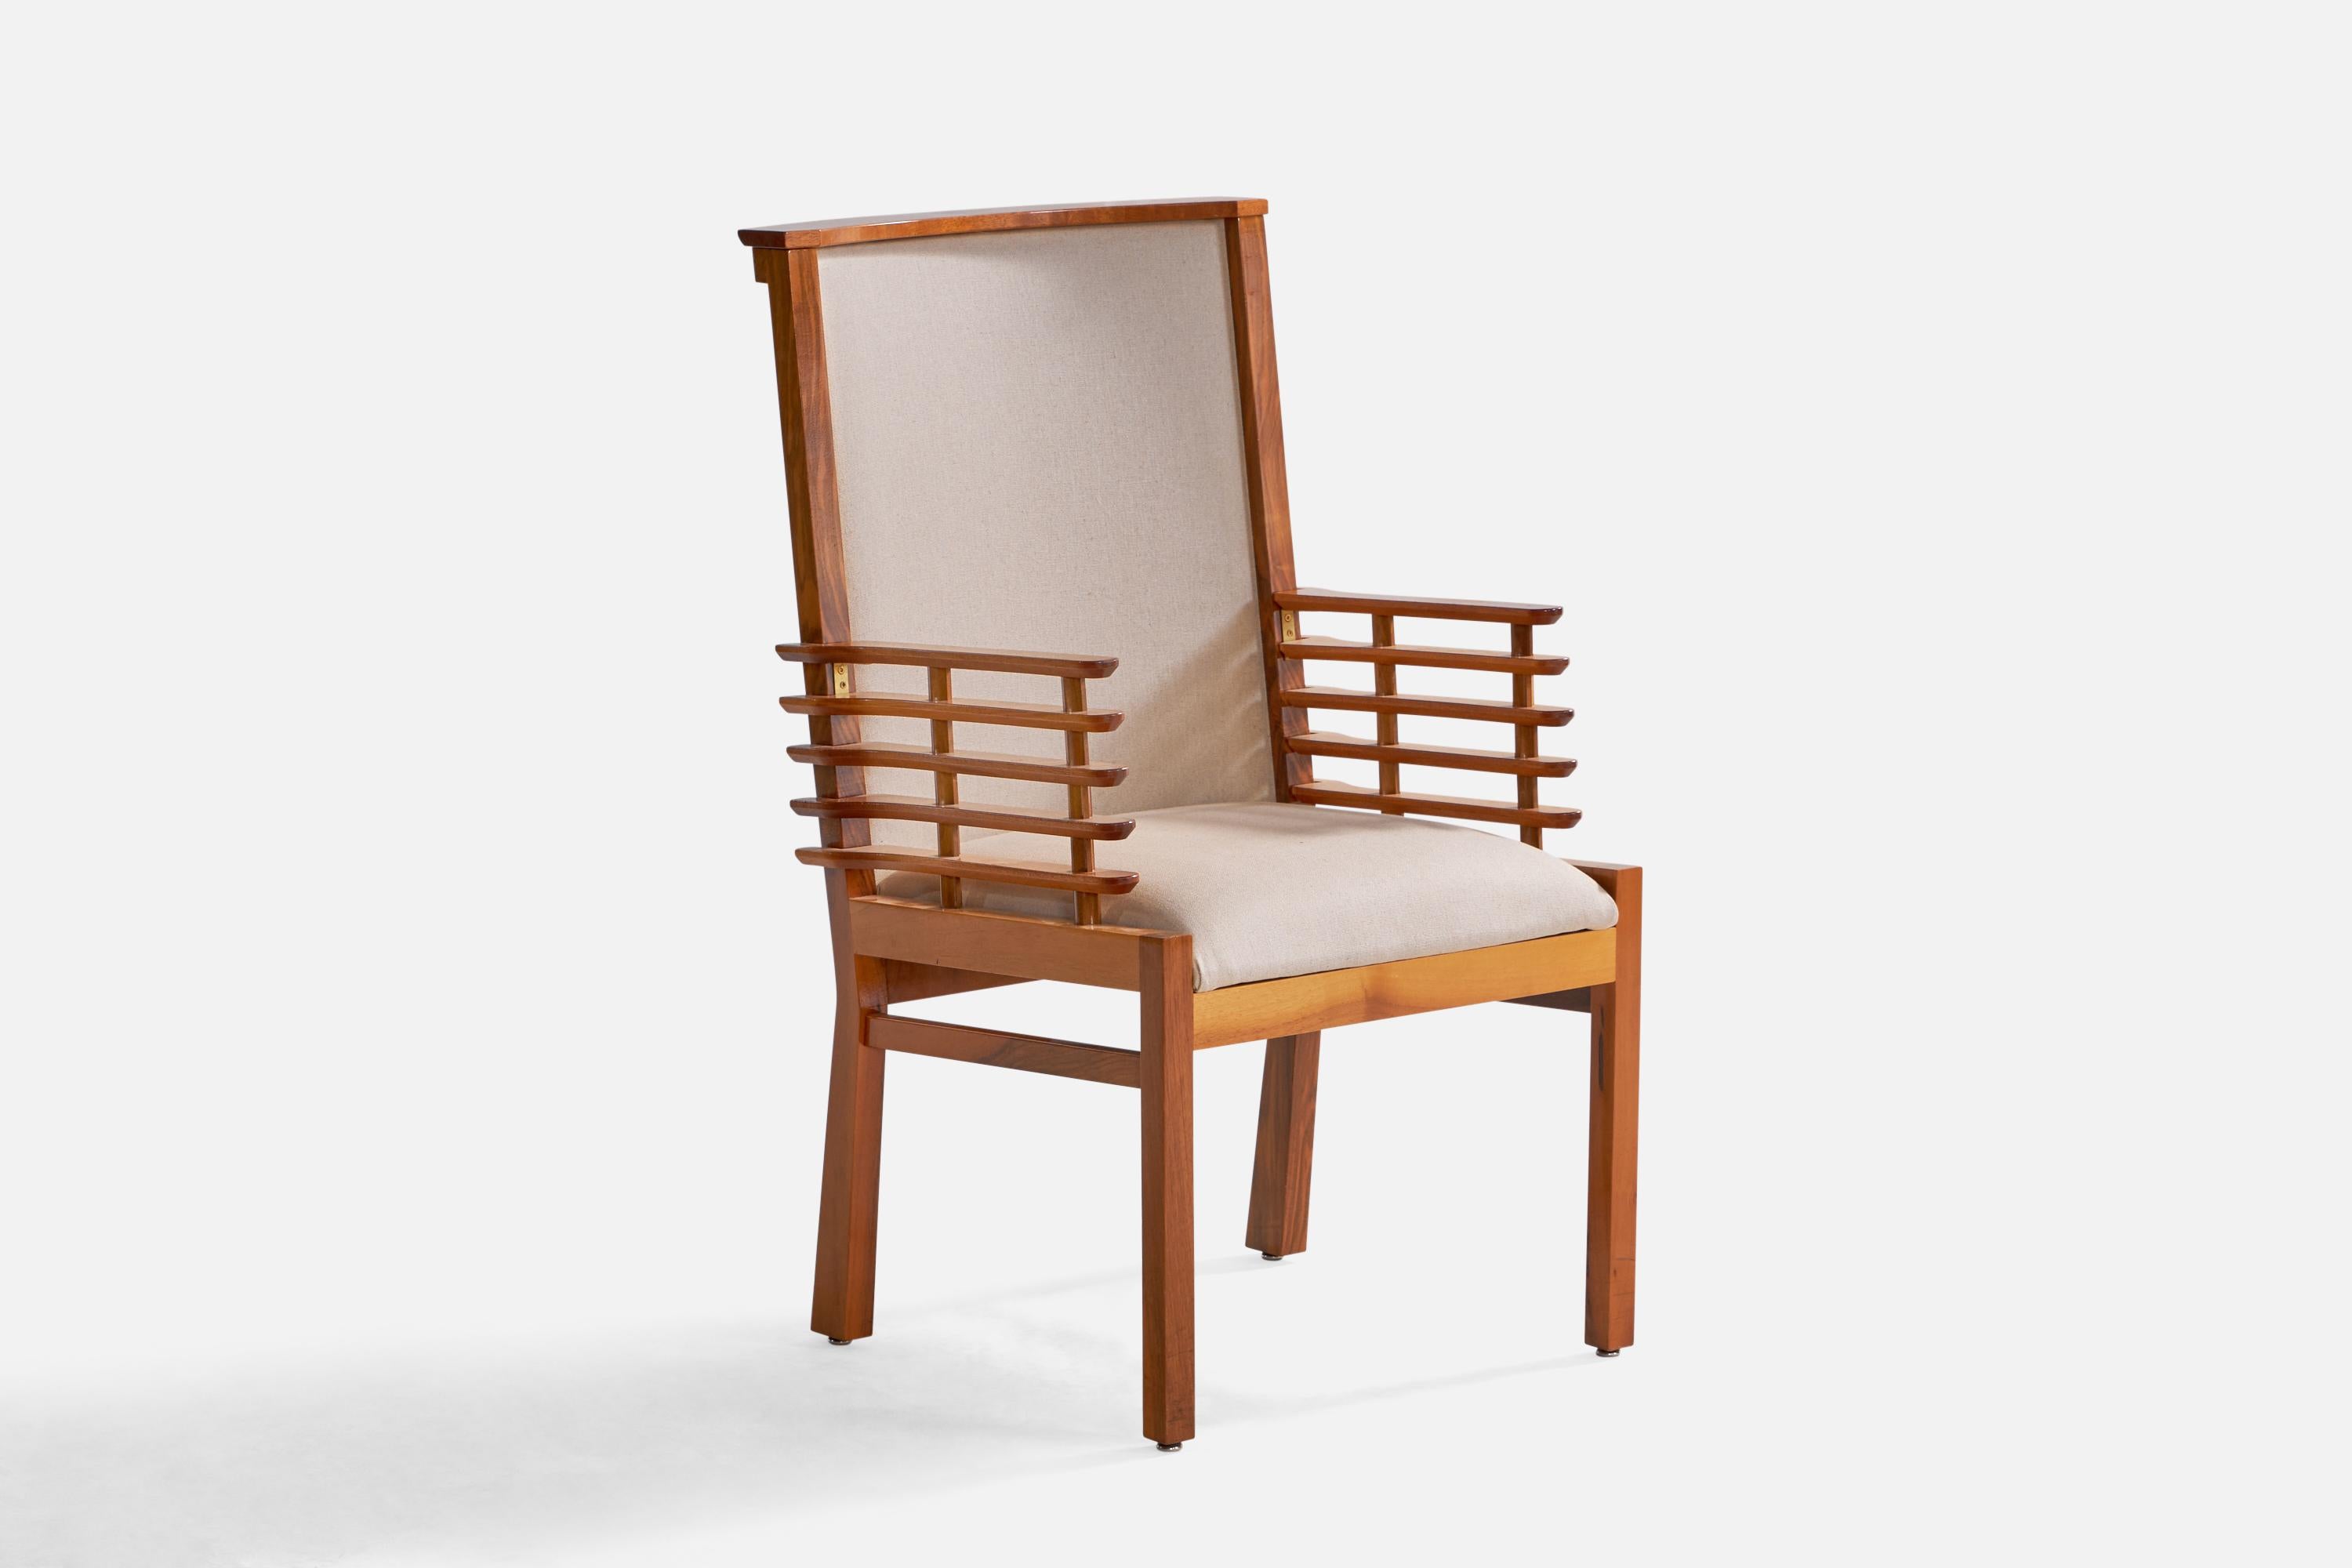 A walnut and off-white fabric armchair designed and produced in Finland, 1950s. 

Provenance: Helsingin Puhelinyhdistys

Seat height: 19.5”